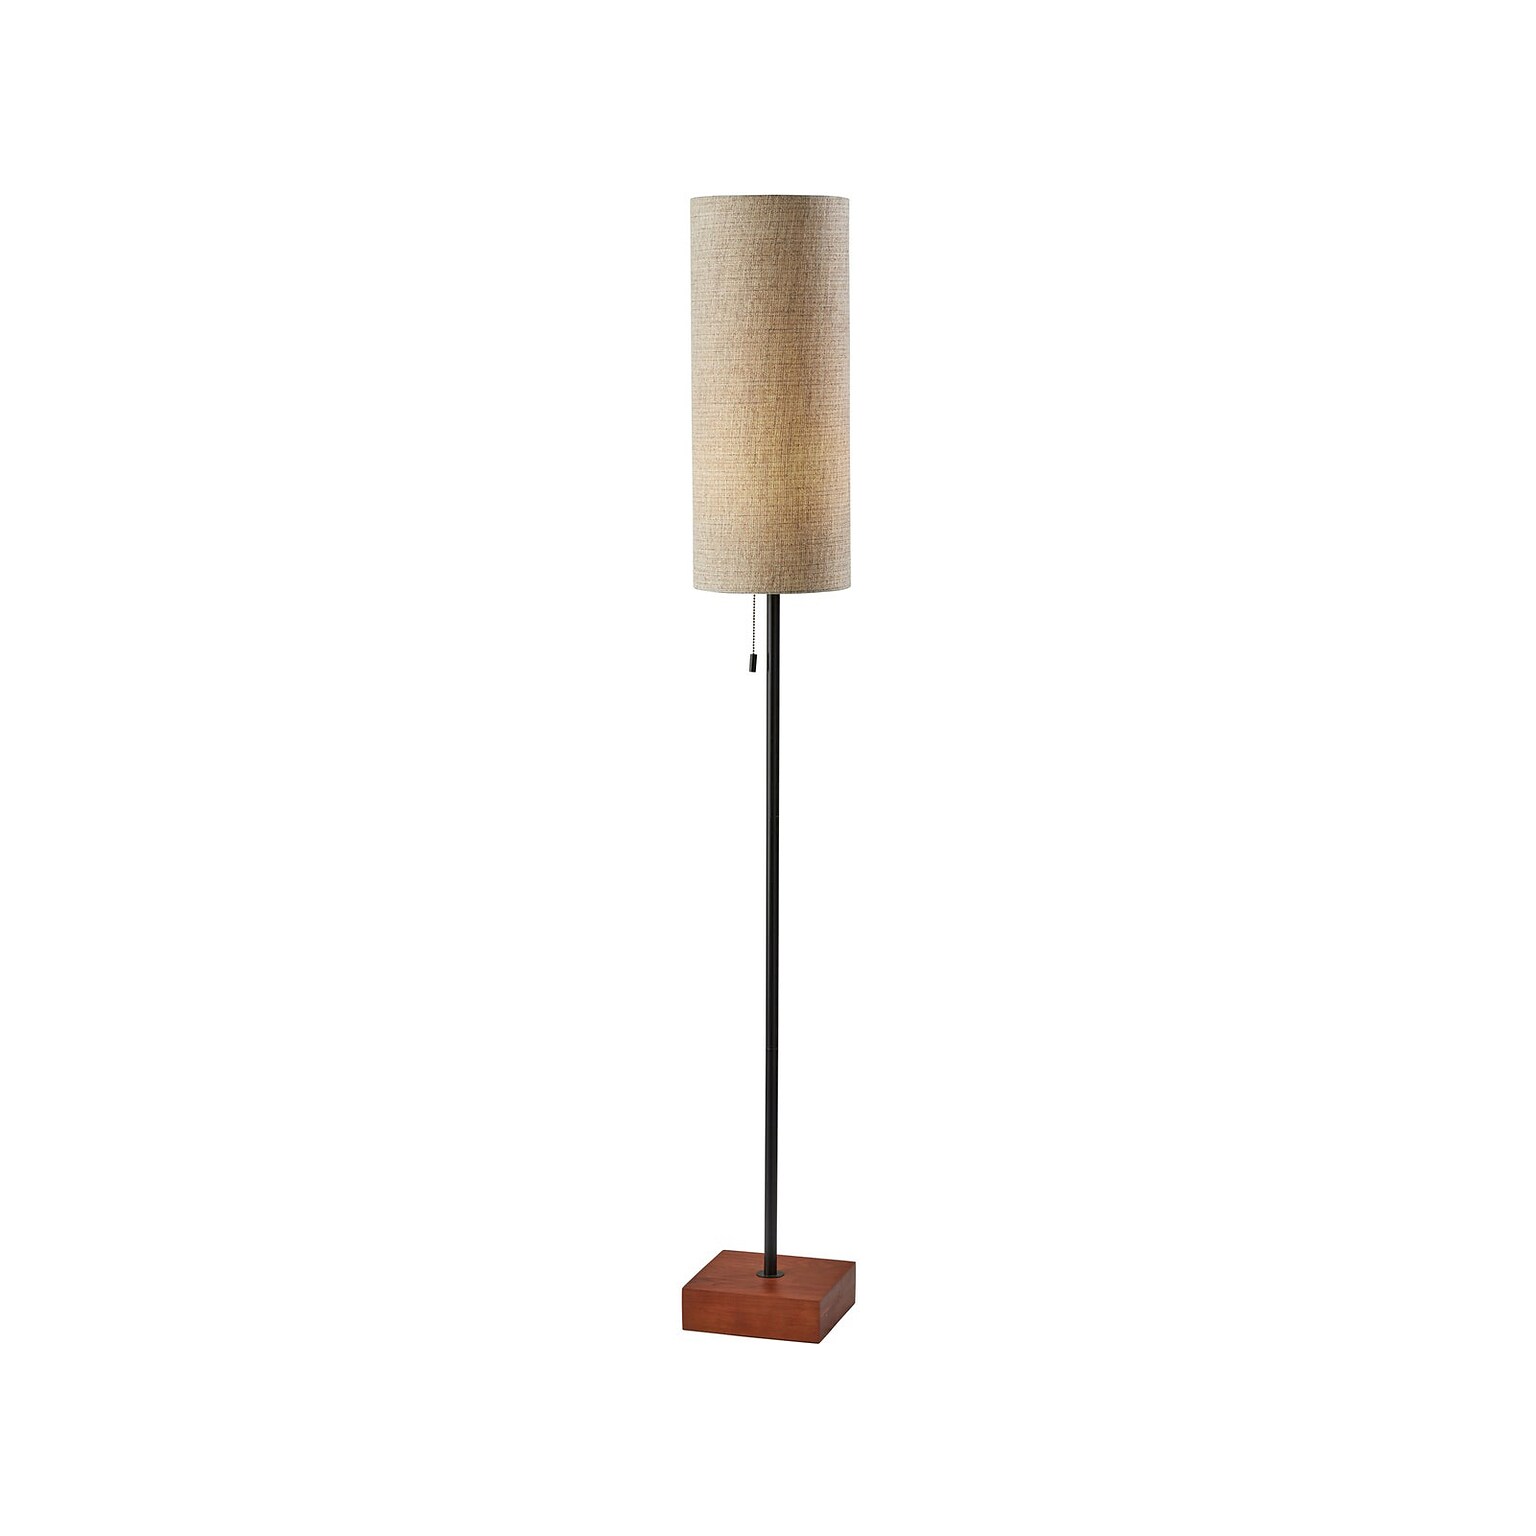 Adesso Trudy 62 Walnut Floor Lamp with Natural Drum Shade (1569-12)